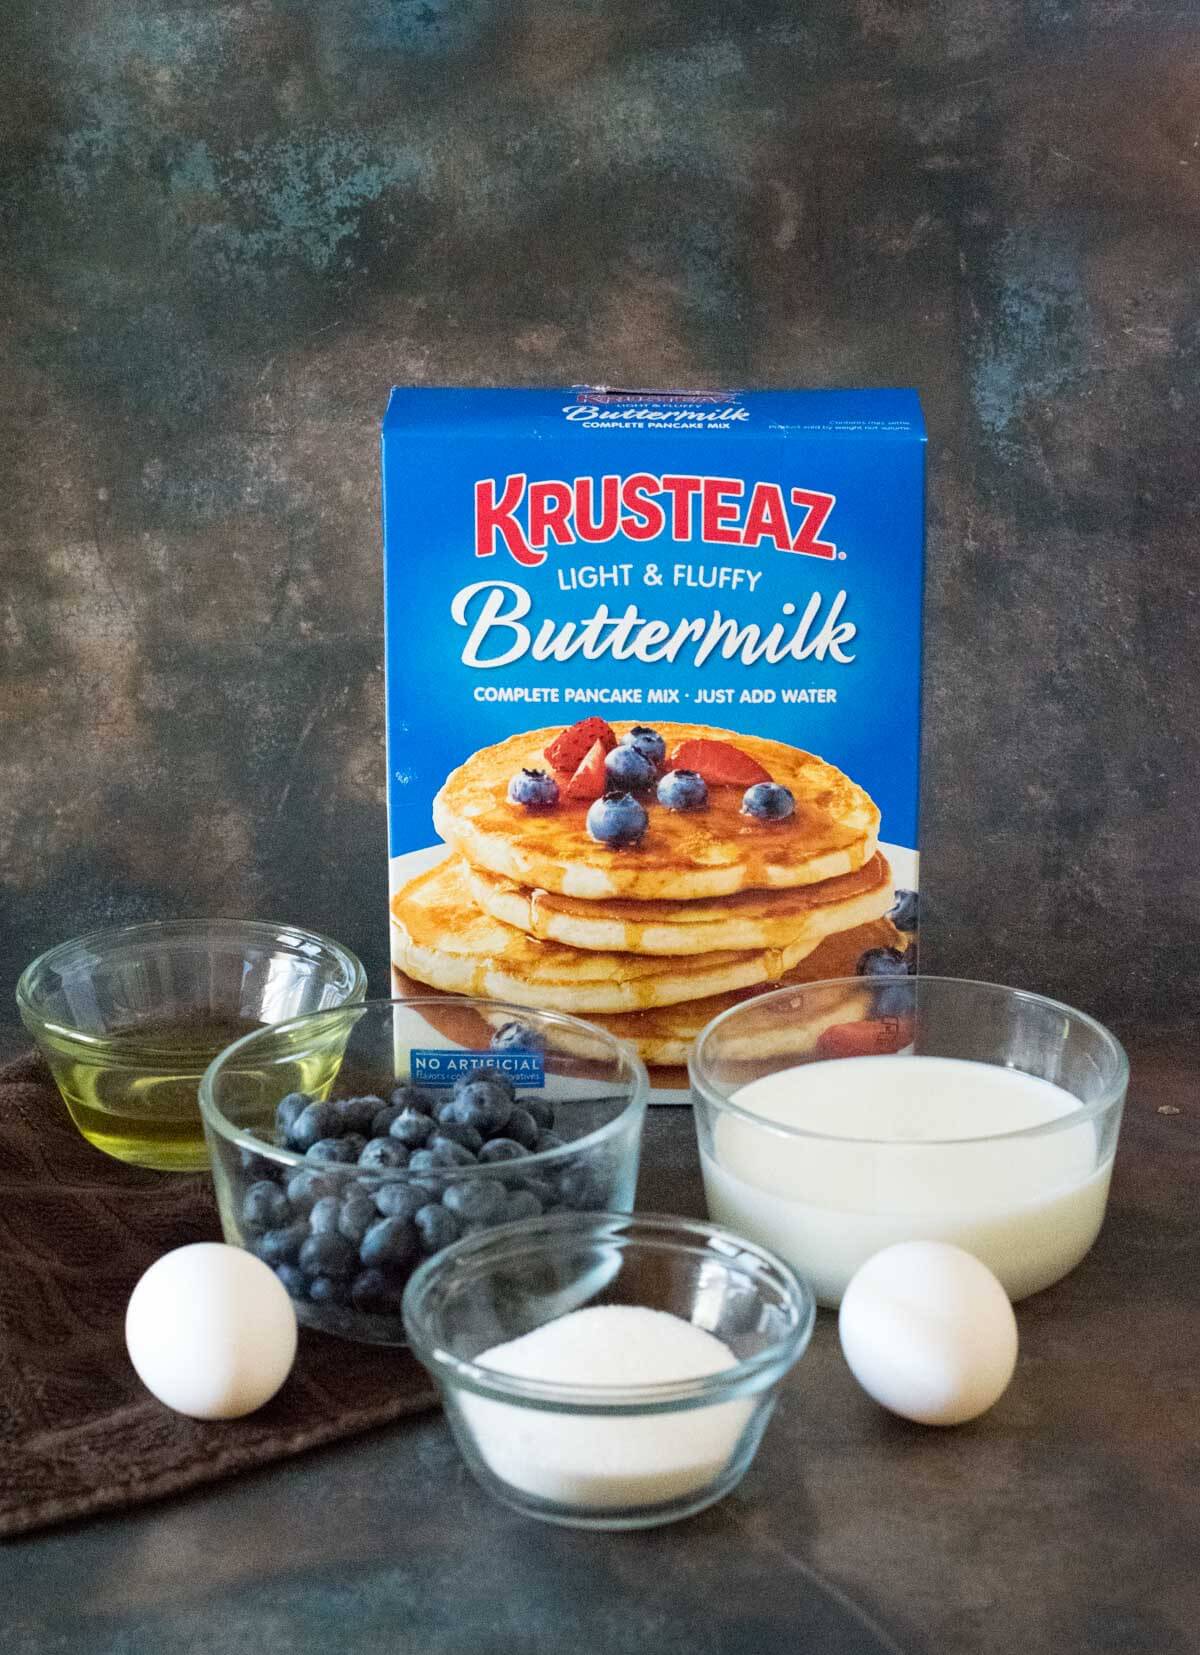 Showing ingredients needed for pancake mix muffins.